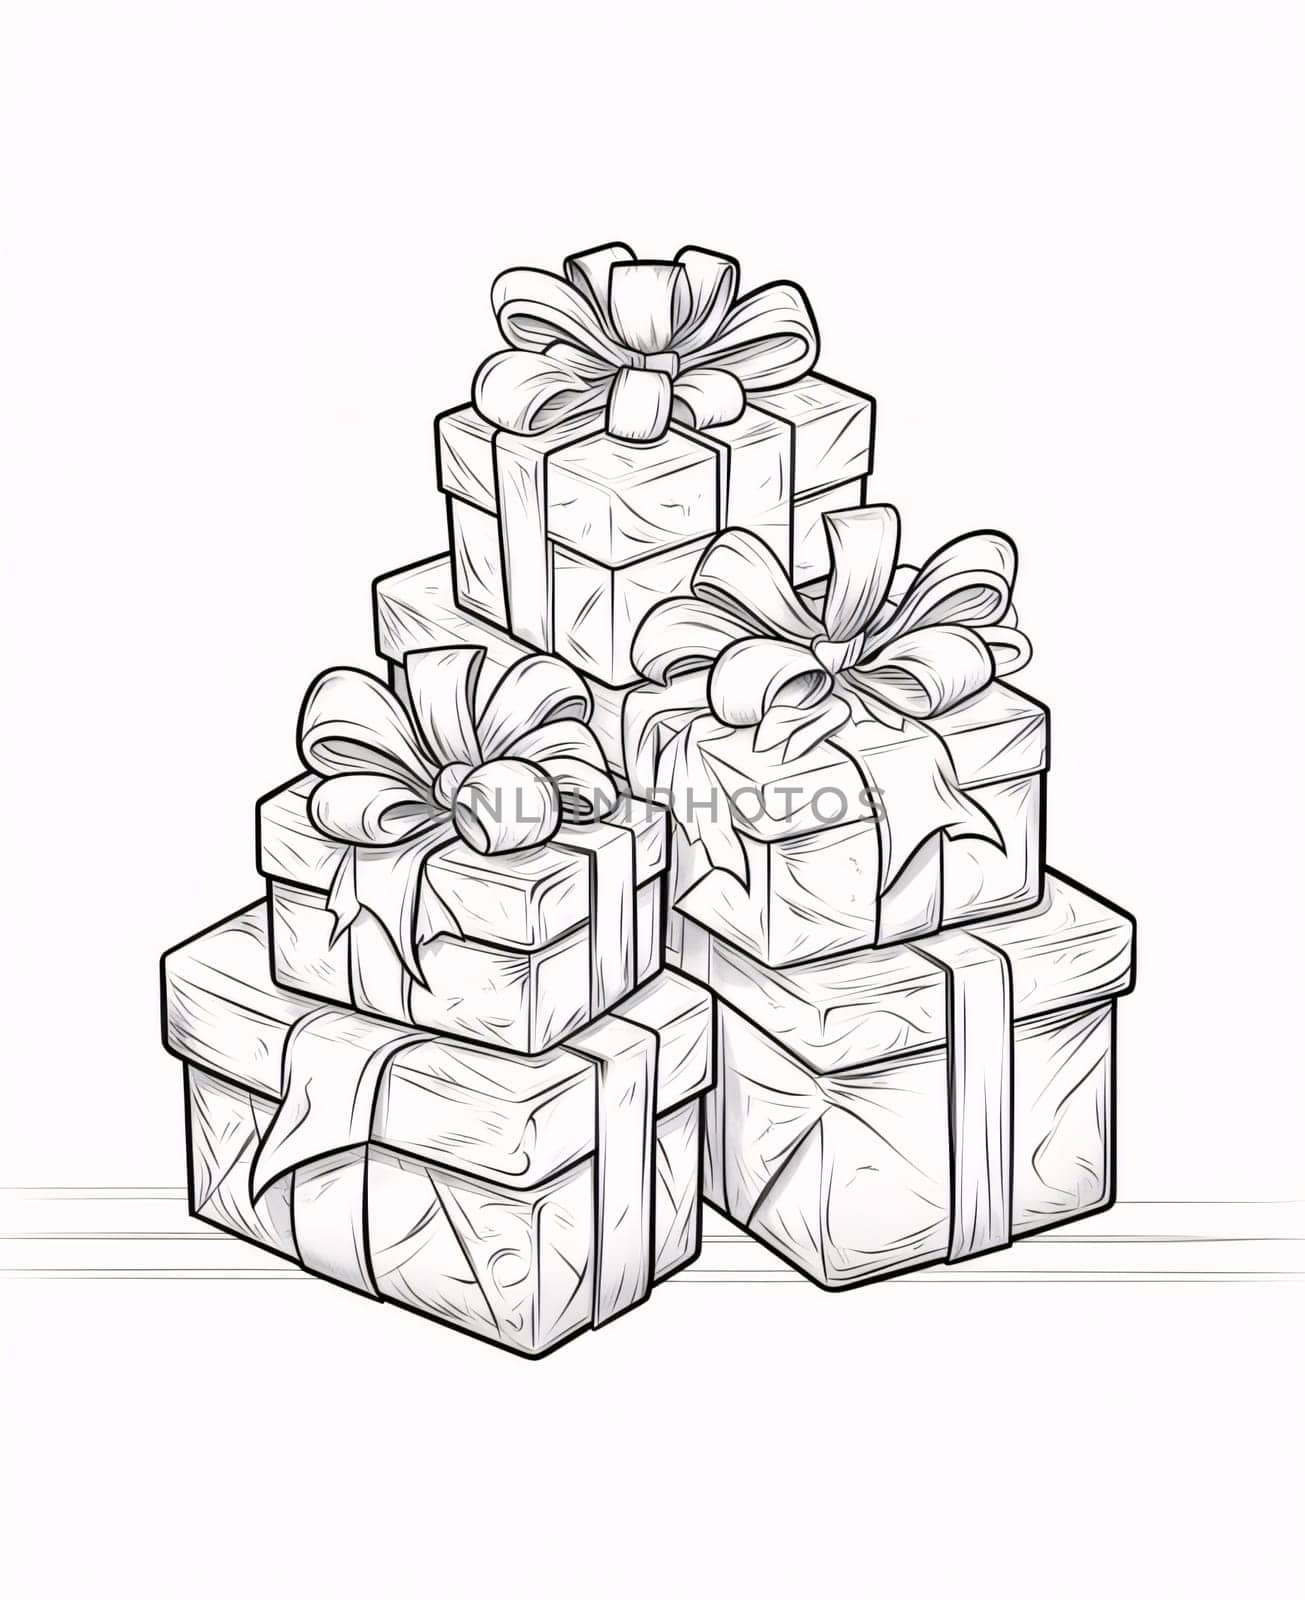 Black and white coloring page; pile of gifts with bows. Gifts as a day symbol of present and love. by ThemesS